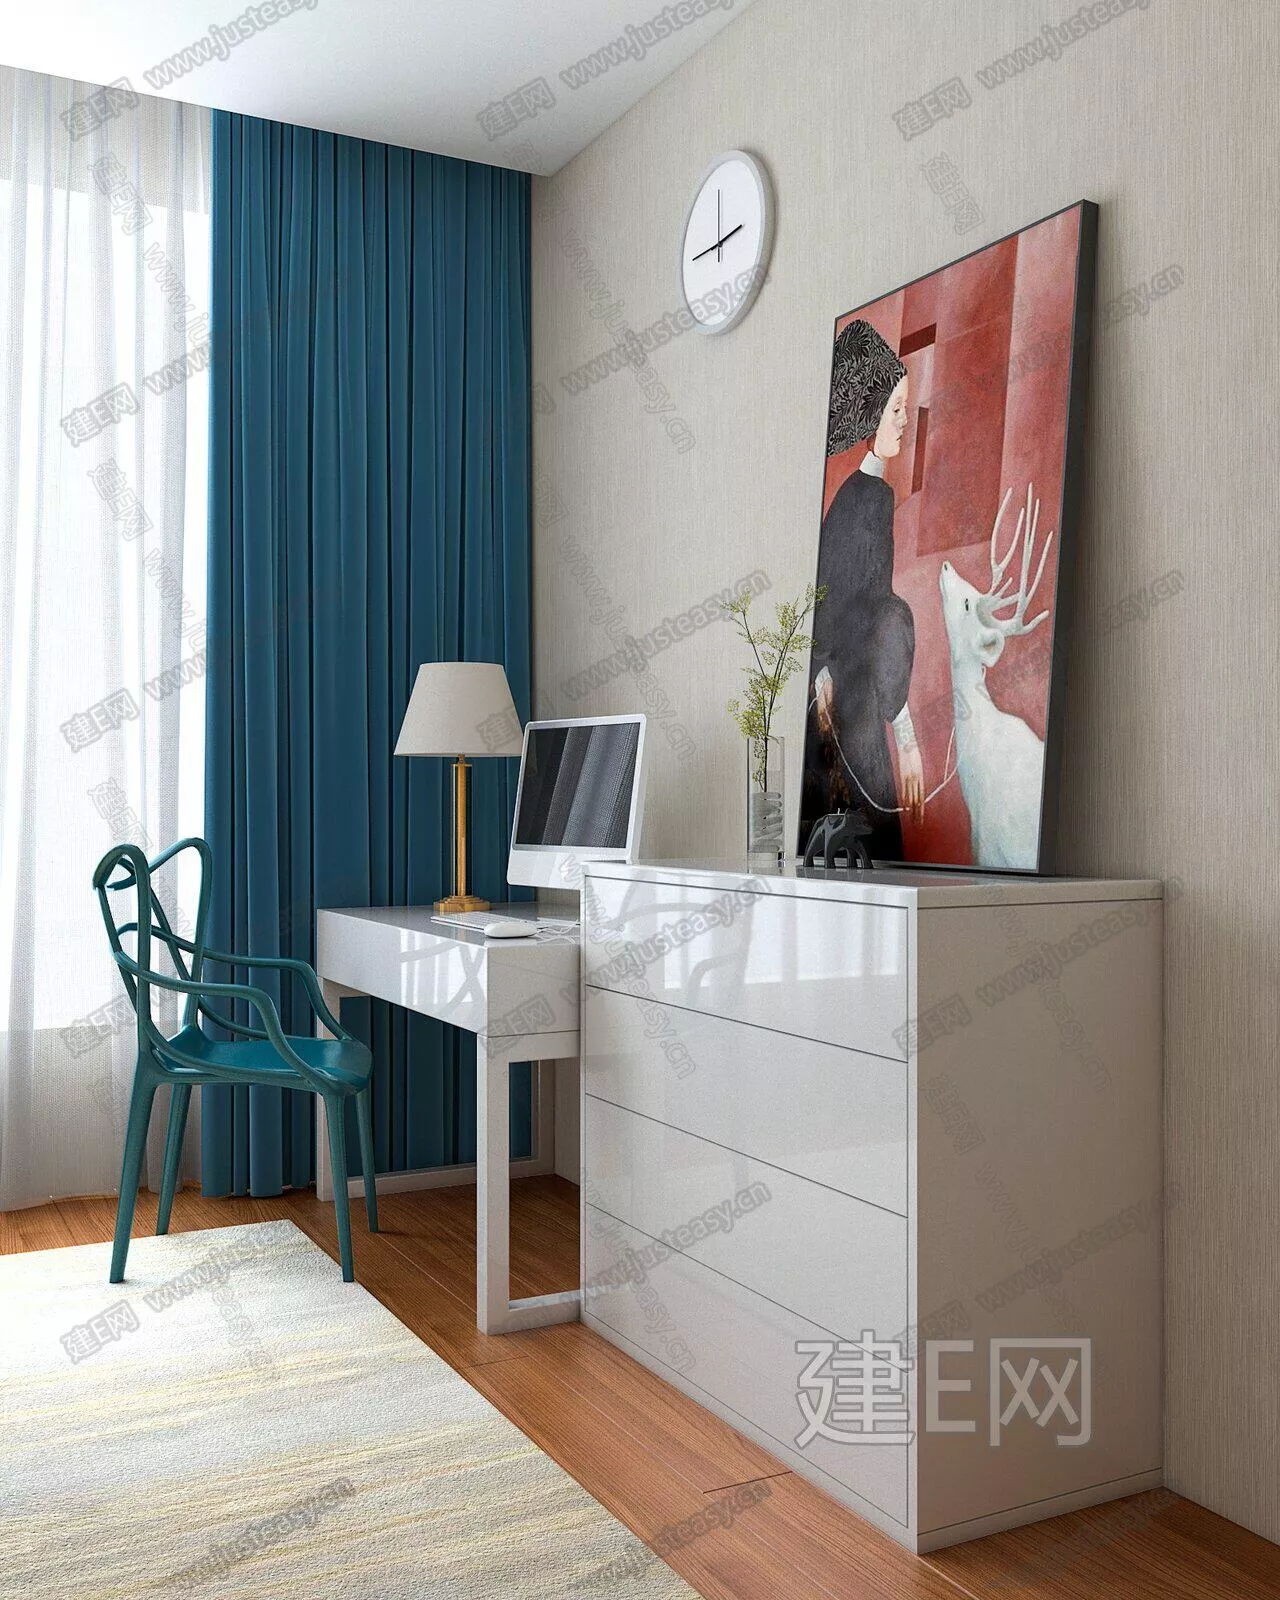 MODERN DESK AND CHAIRS - SKETCHUP 3D MODEL - ENSCAPE - 111234460